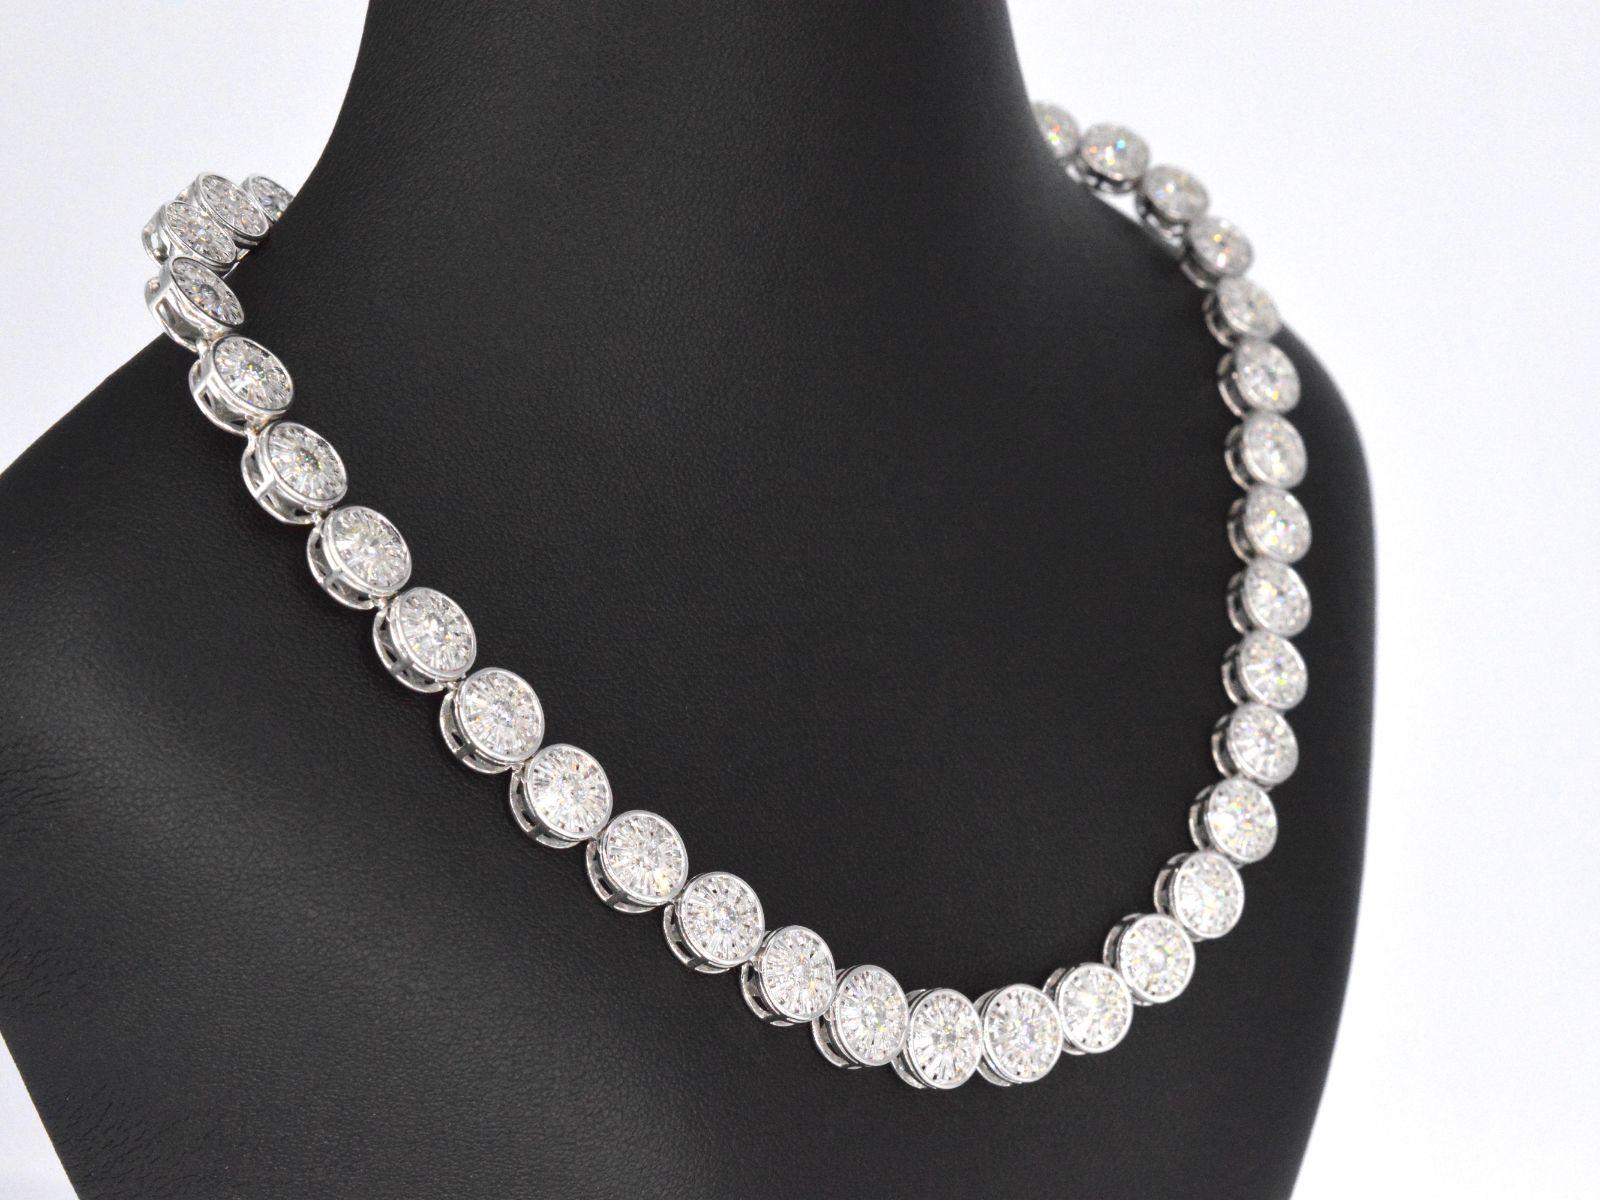 Contemporary White gold necklace with 15.00 carat diamonds